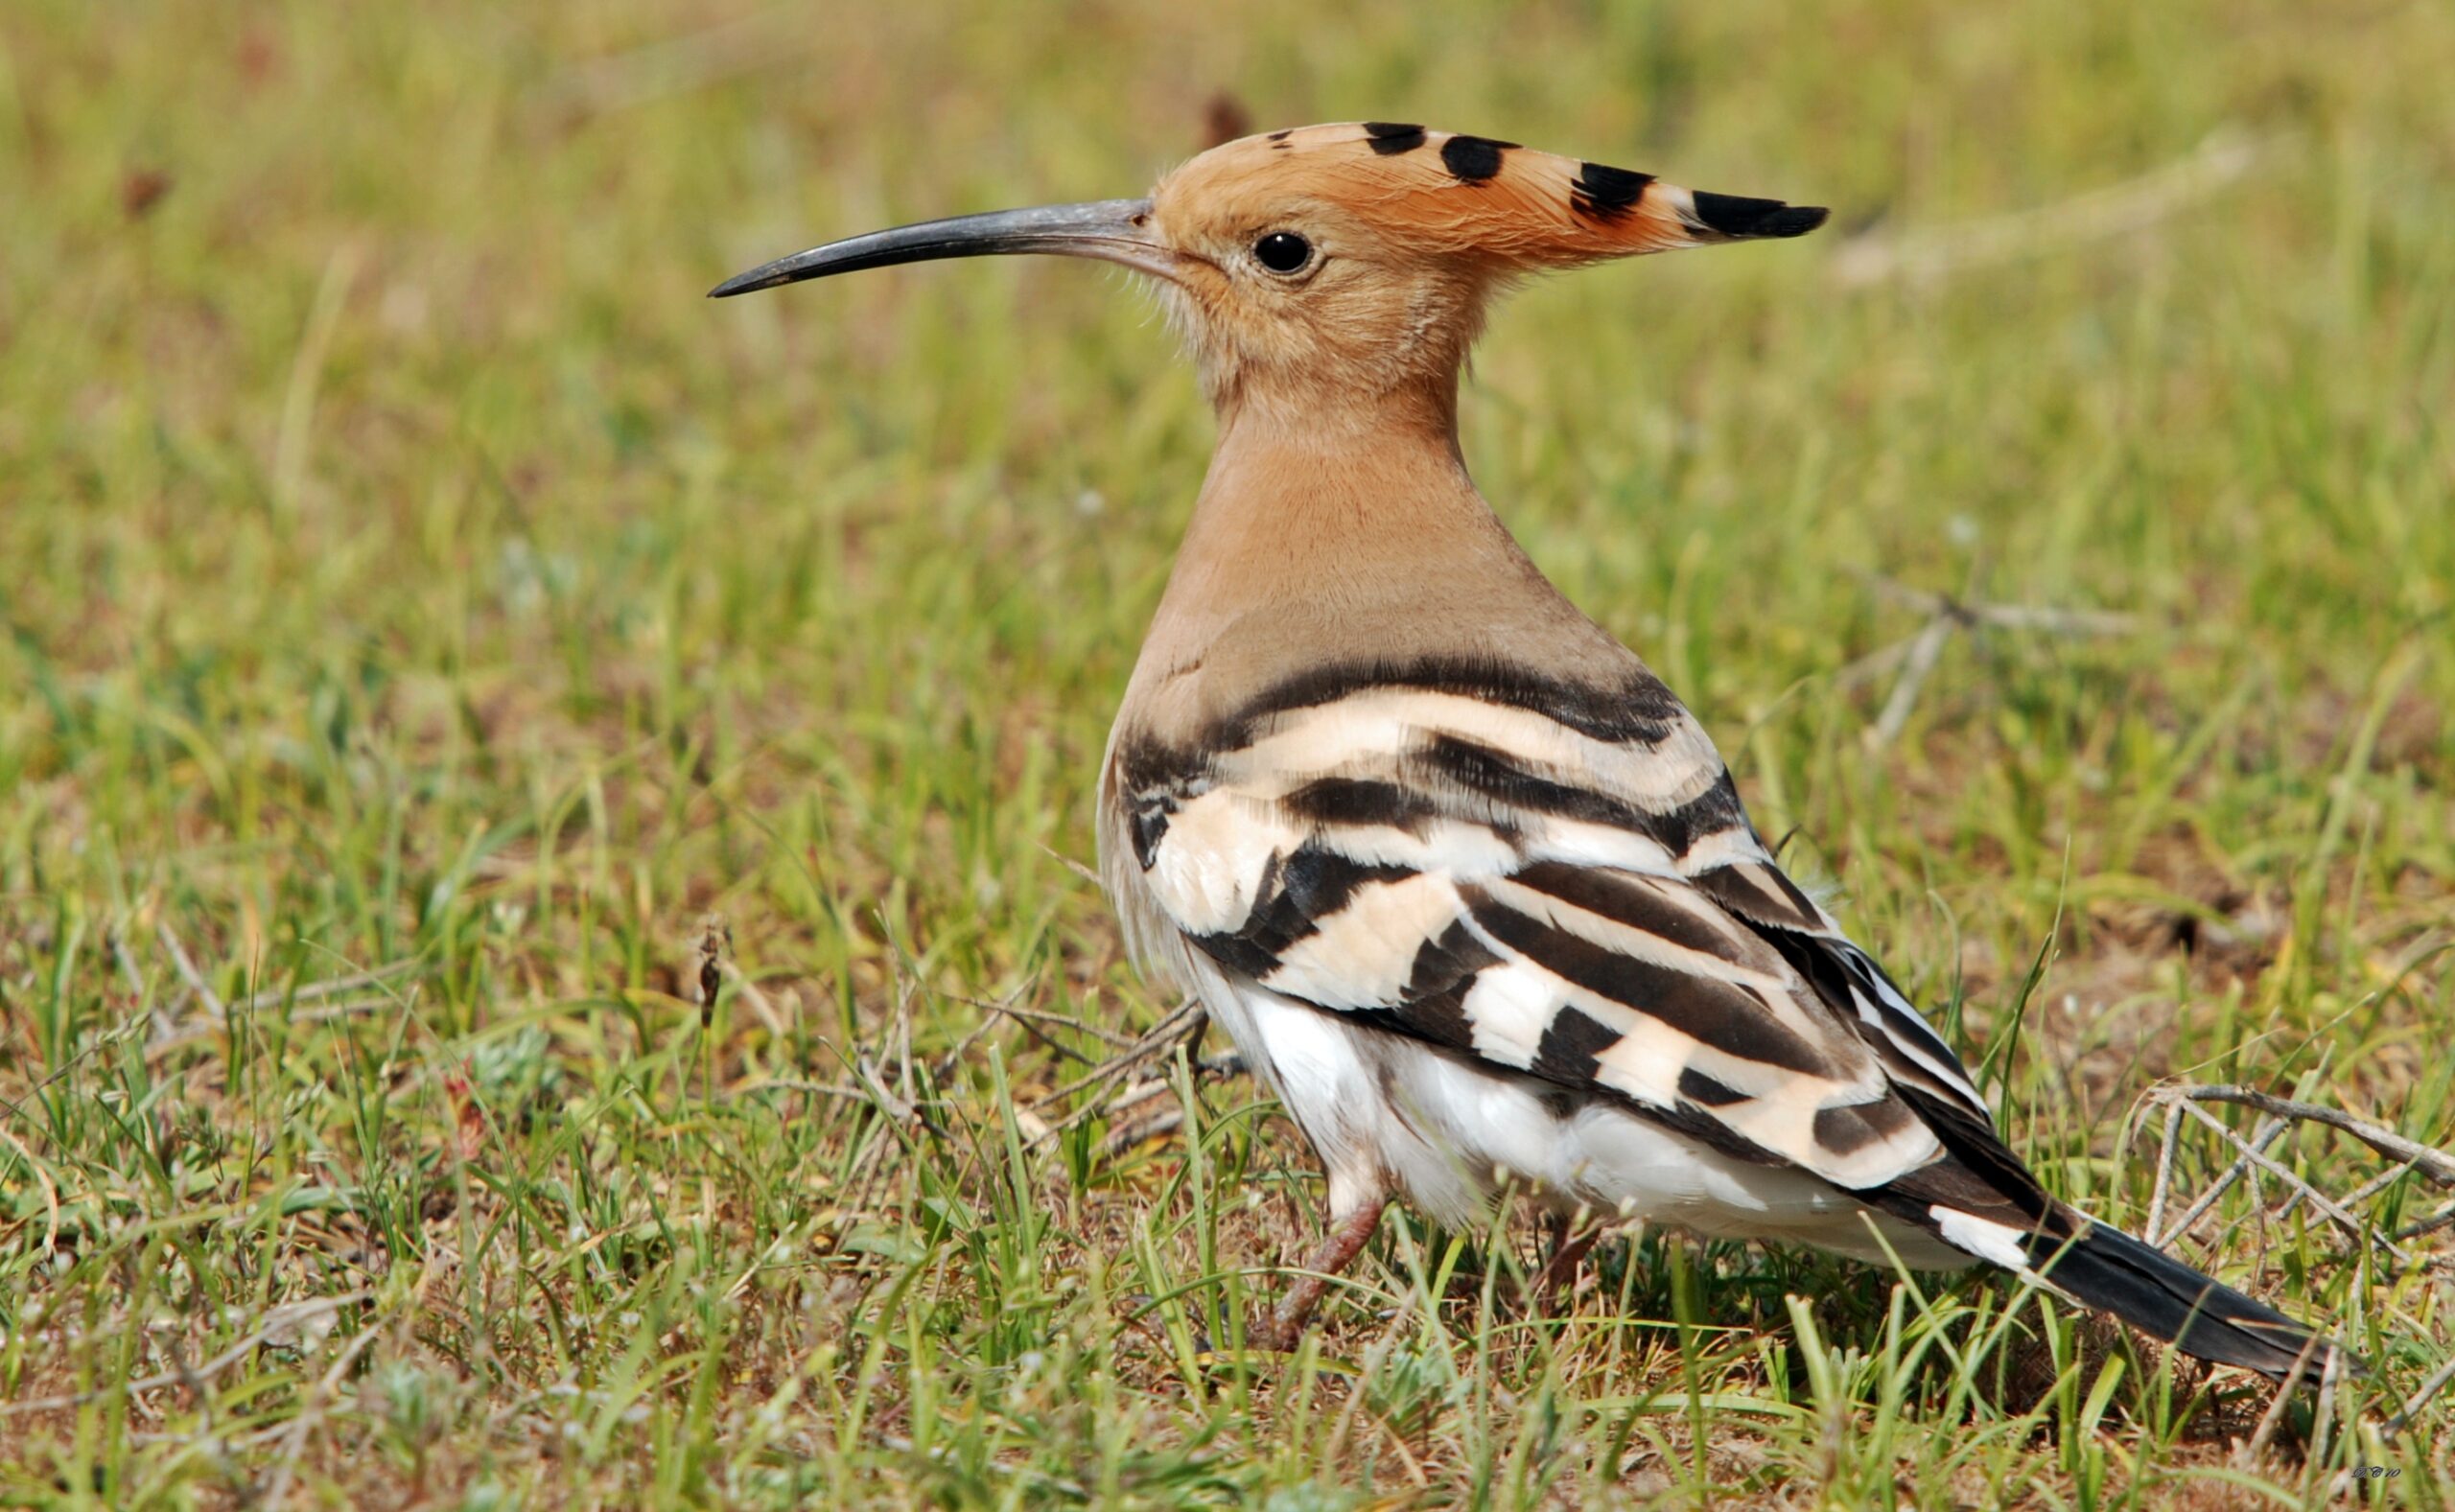 Eurasian Hoopoe photos and wallpapers Collection of the